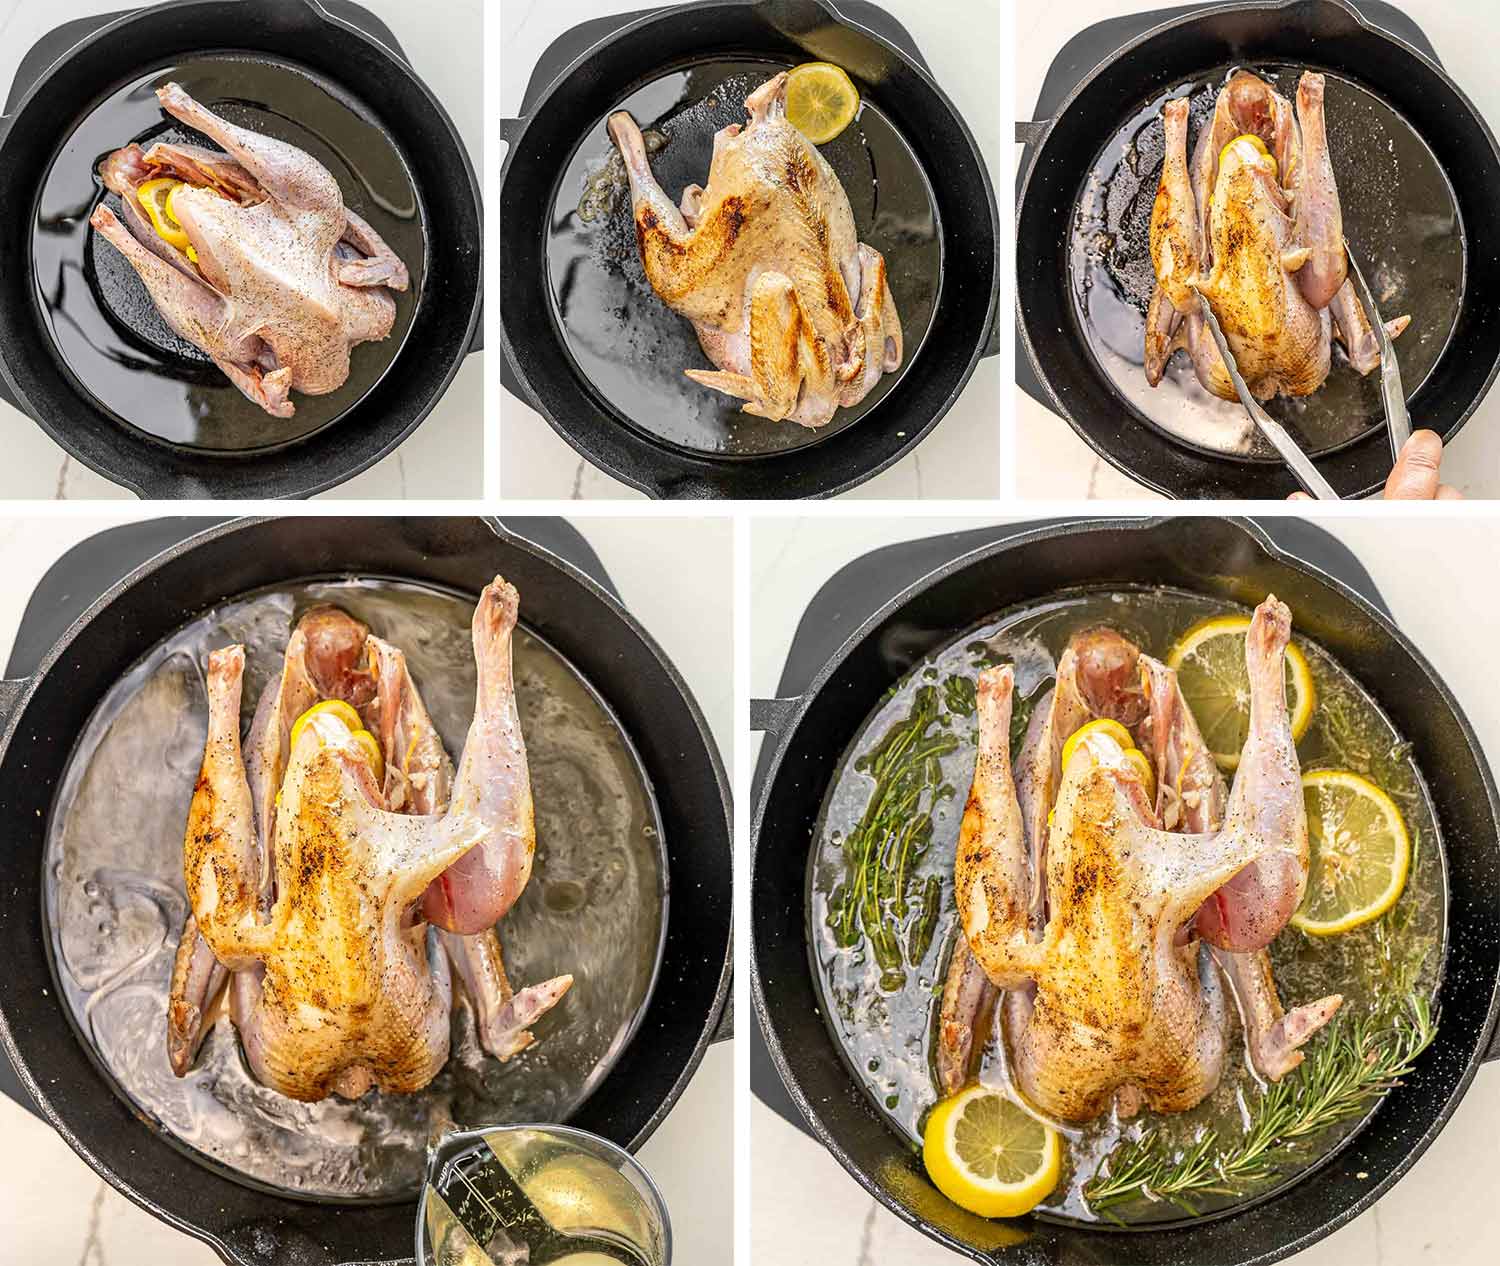 process shots showing how to make roast pheasant.